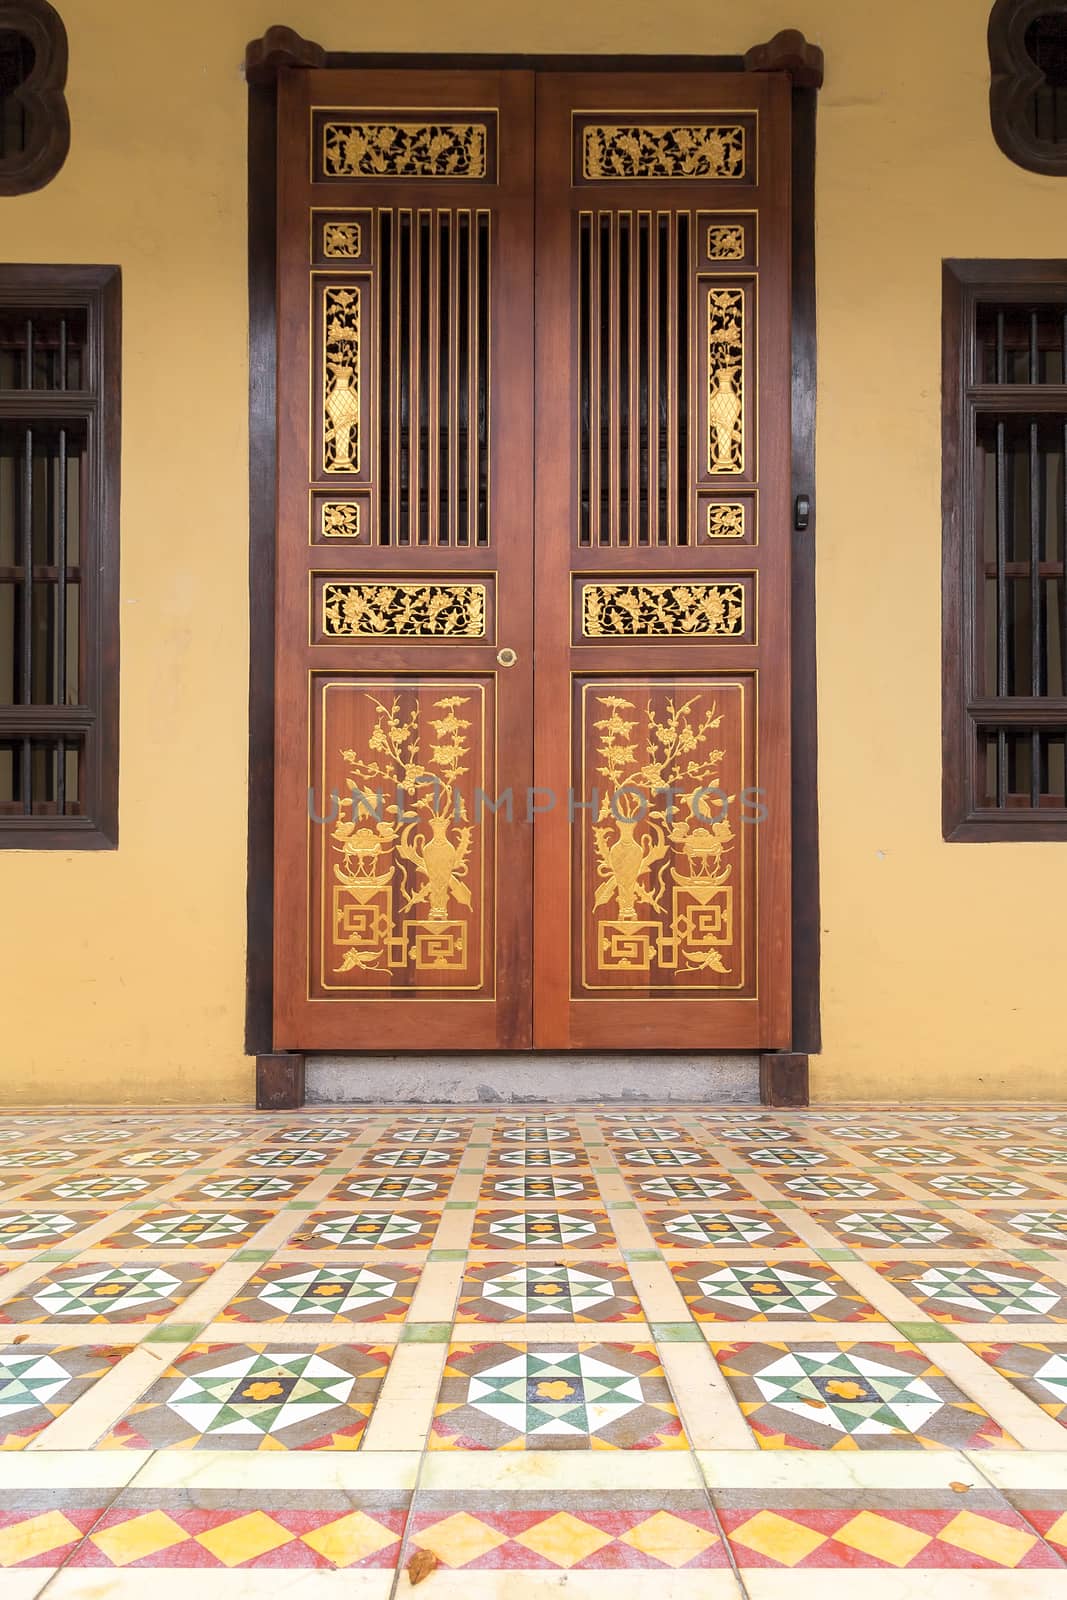 Ornate Doors of Peranakan Style exterior with Chinese wood carvings and colorful tiles entrance